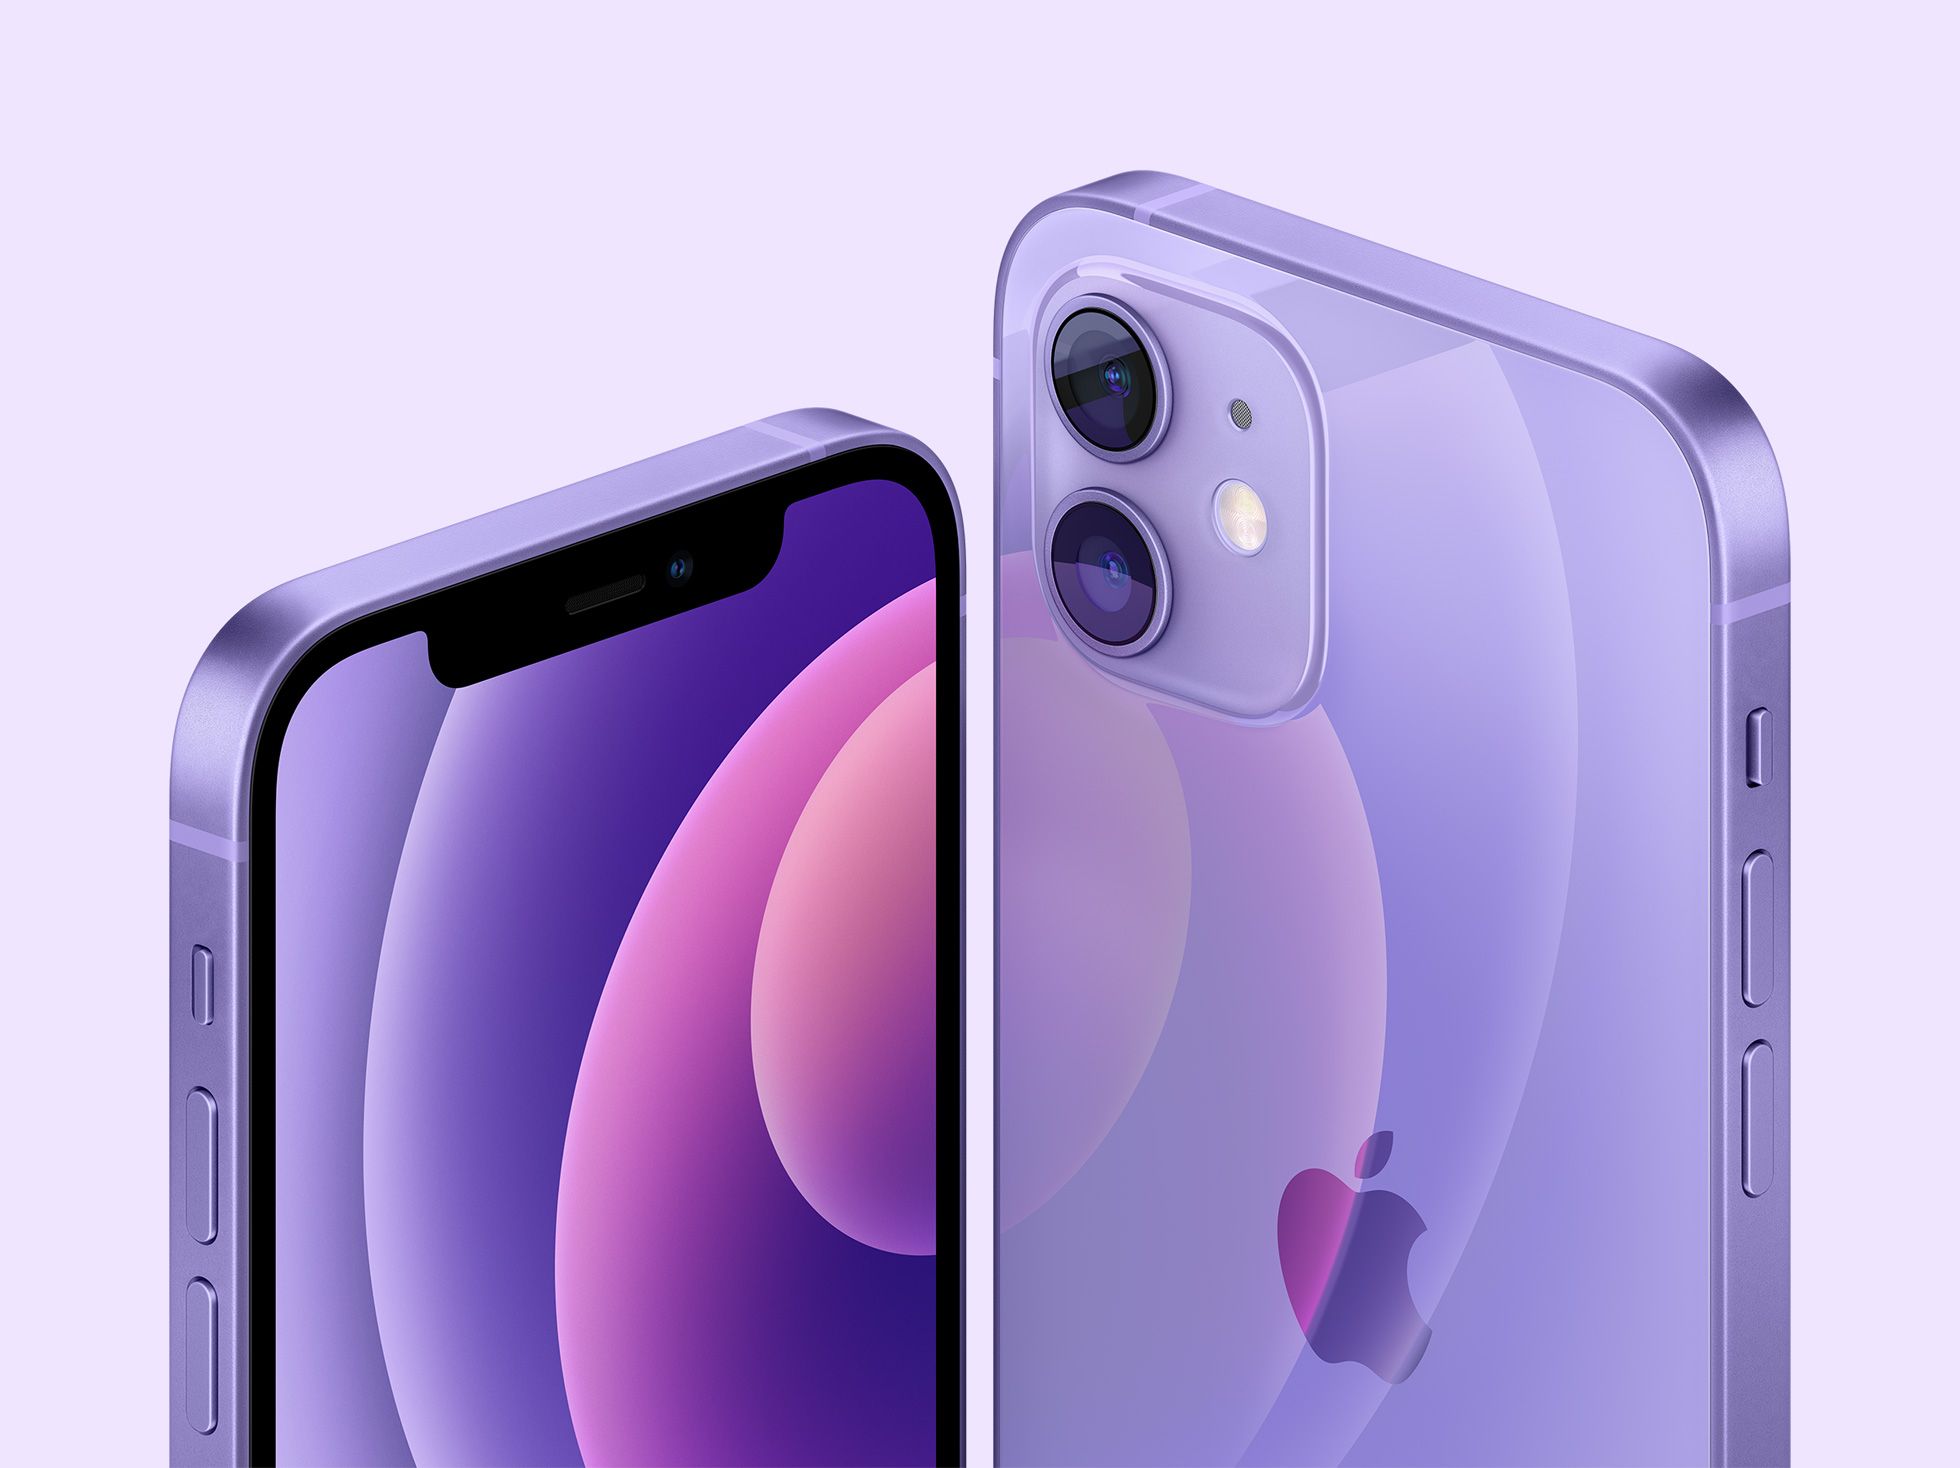 The iPhone 12 and 12 Mini in Apple's new purple colour